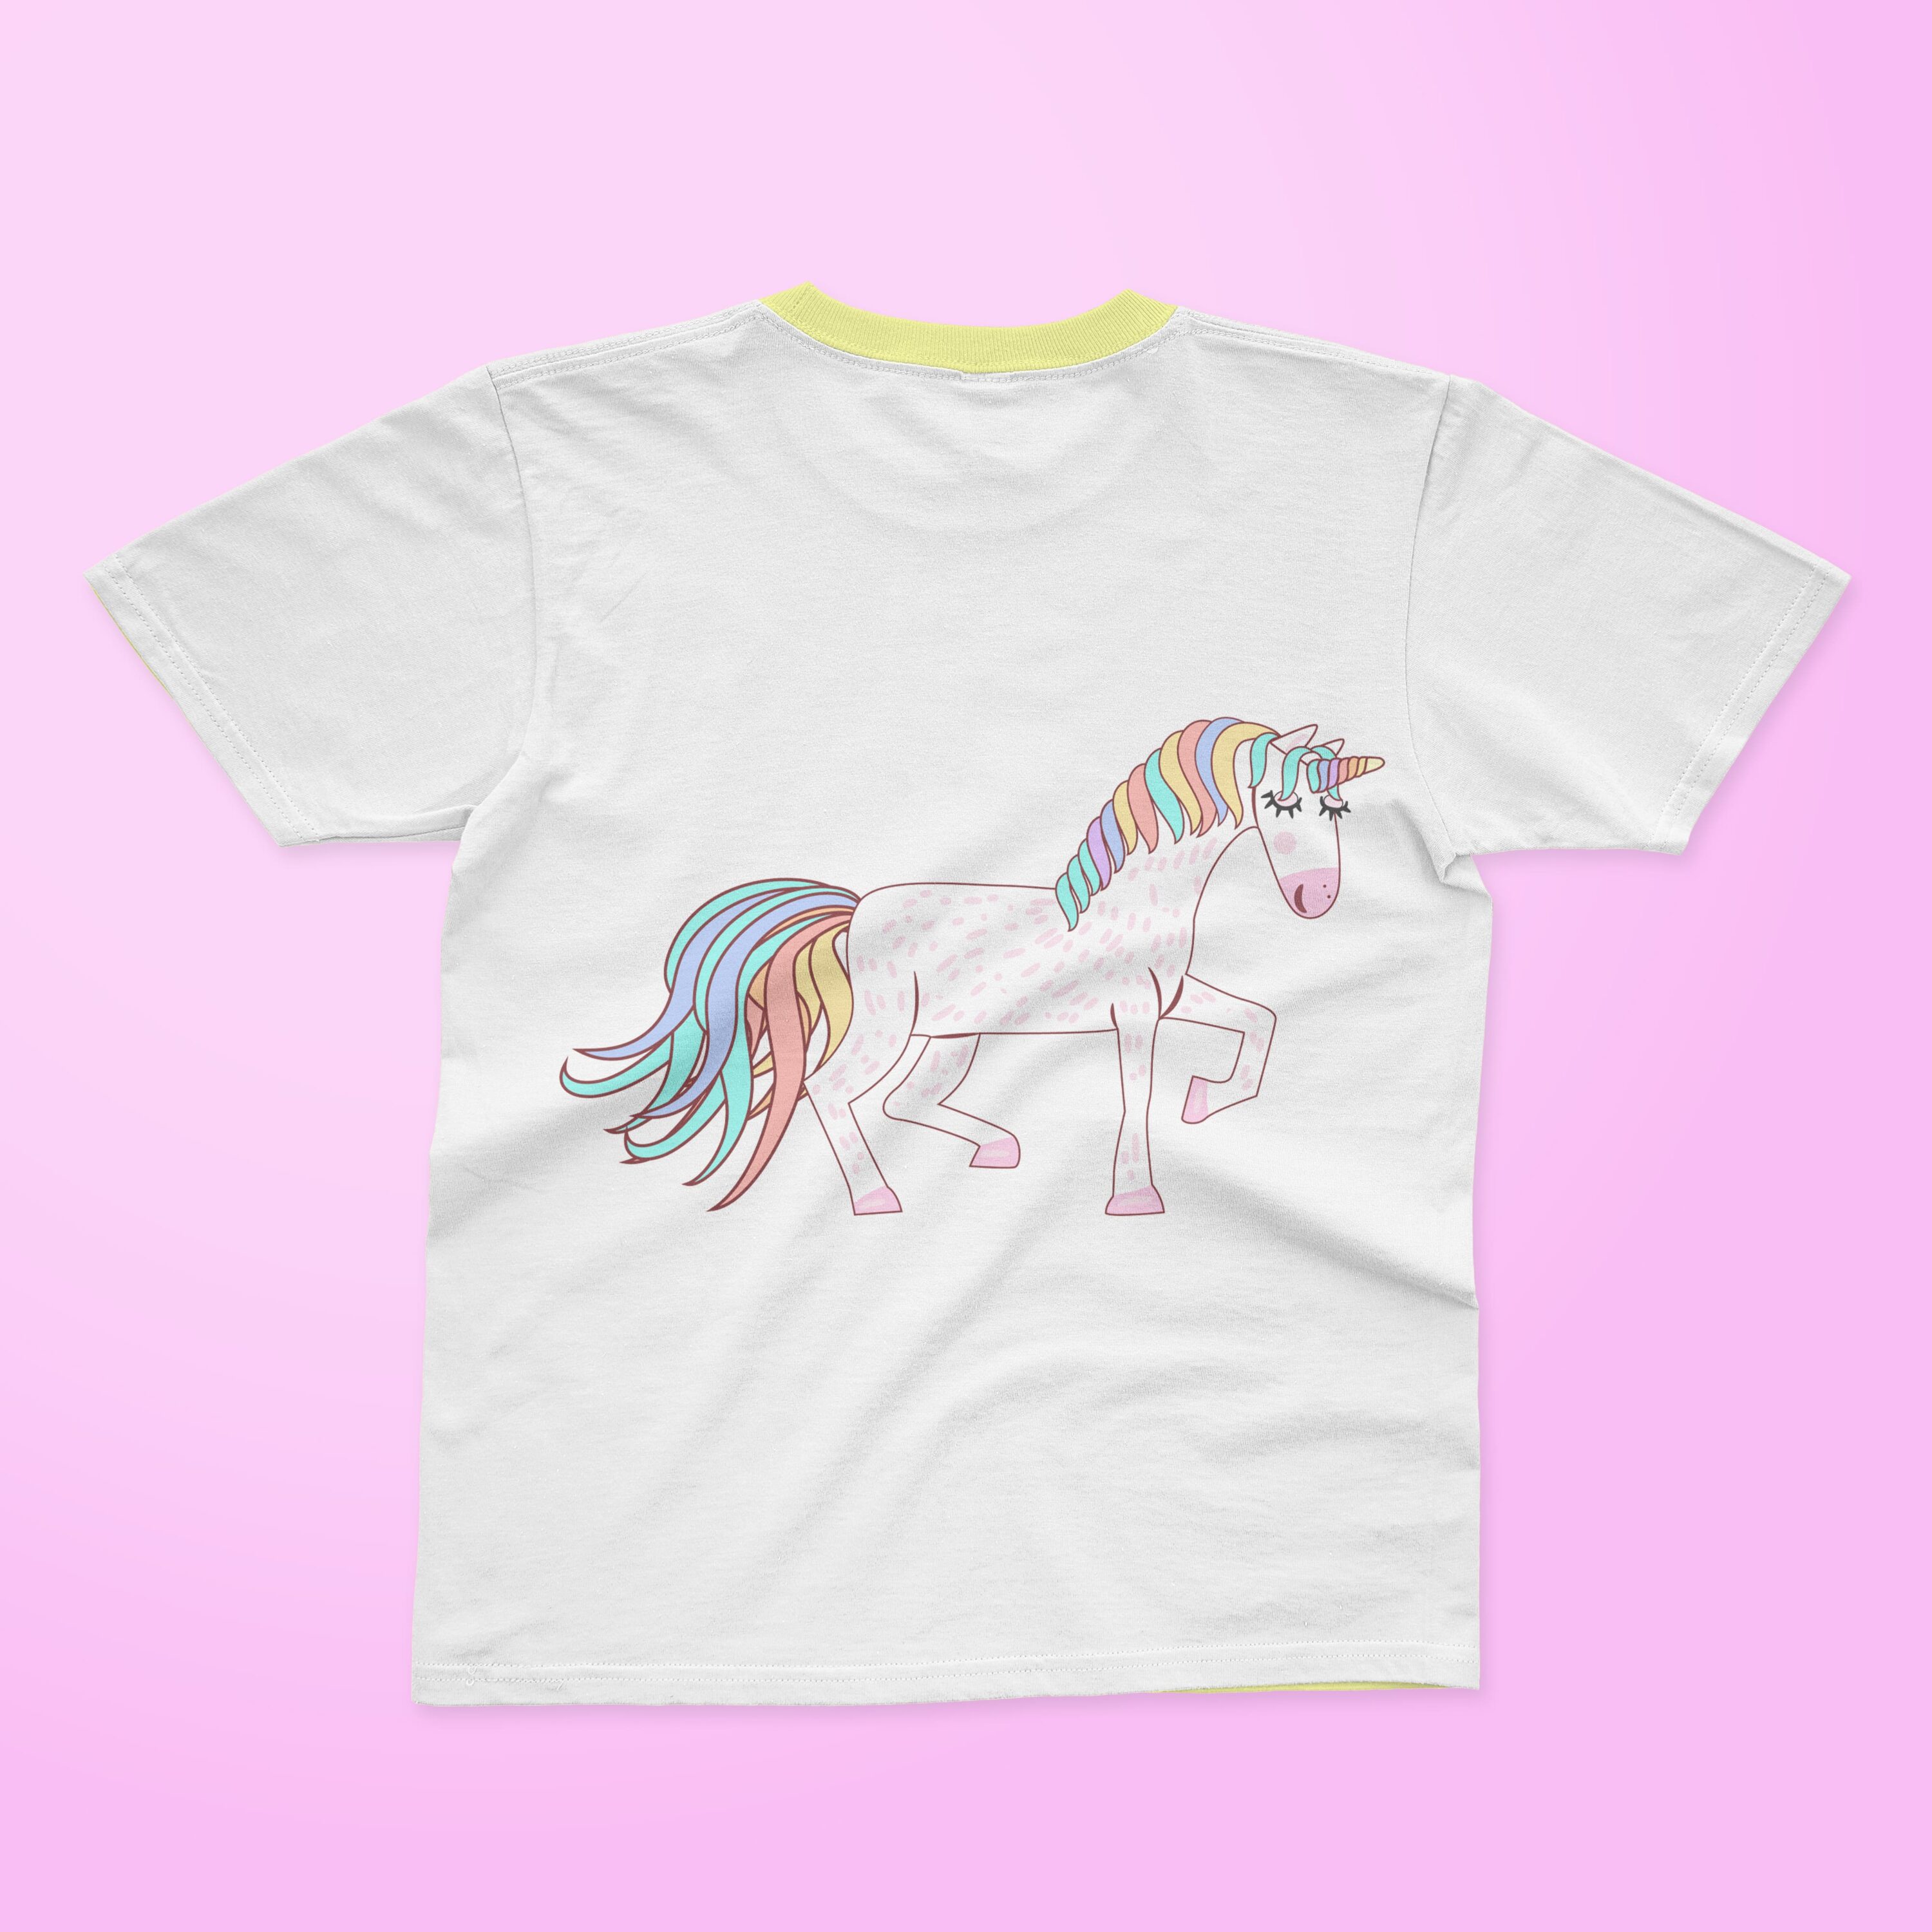 White t-shirt with a yellow collar and a cute unicorn on a pink background.